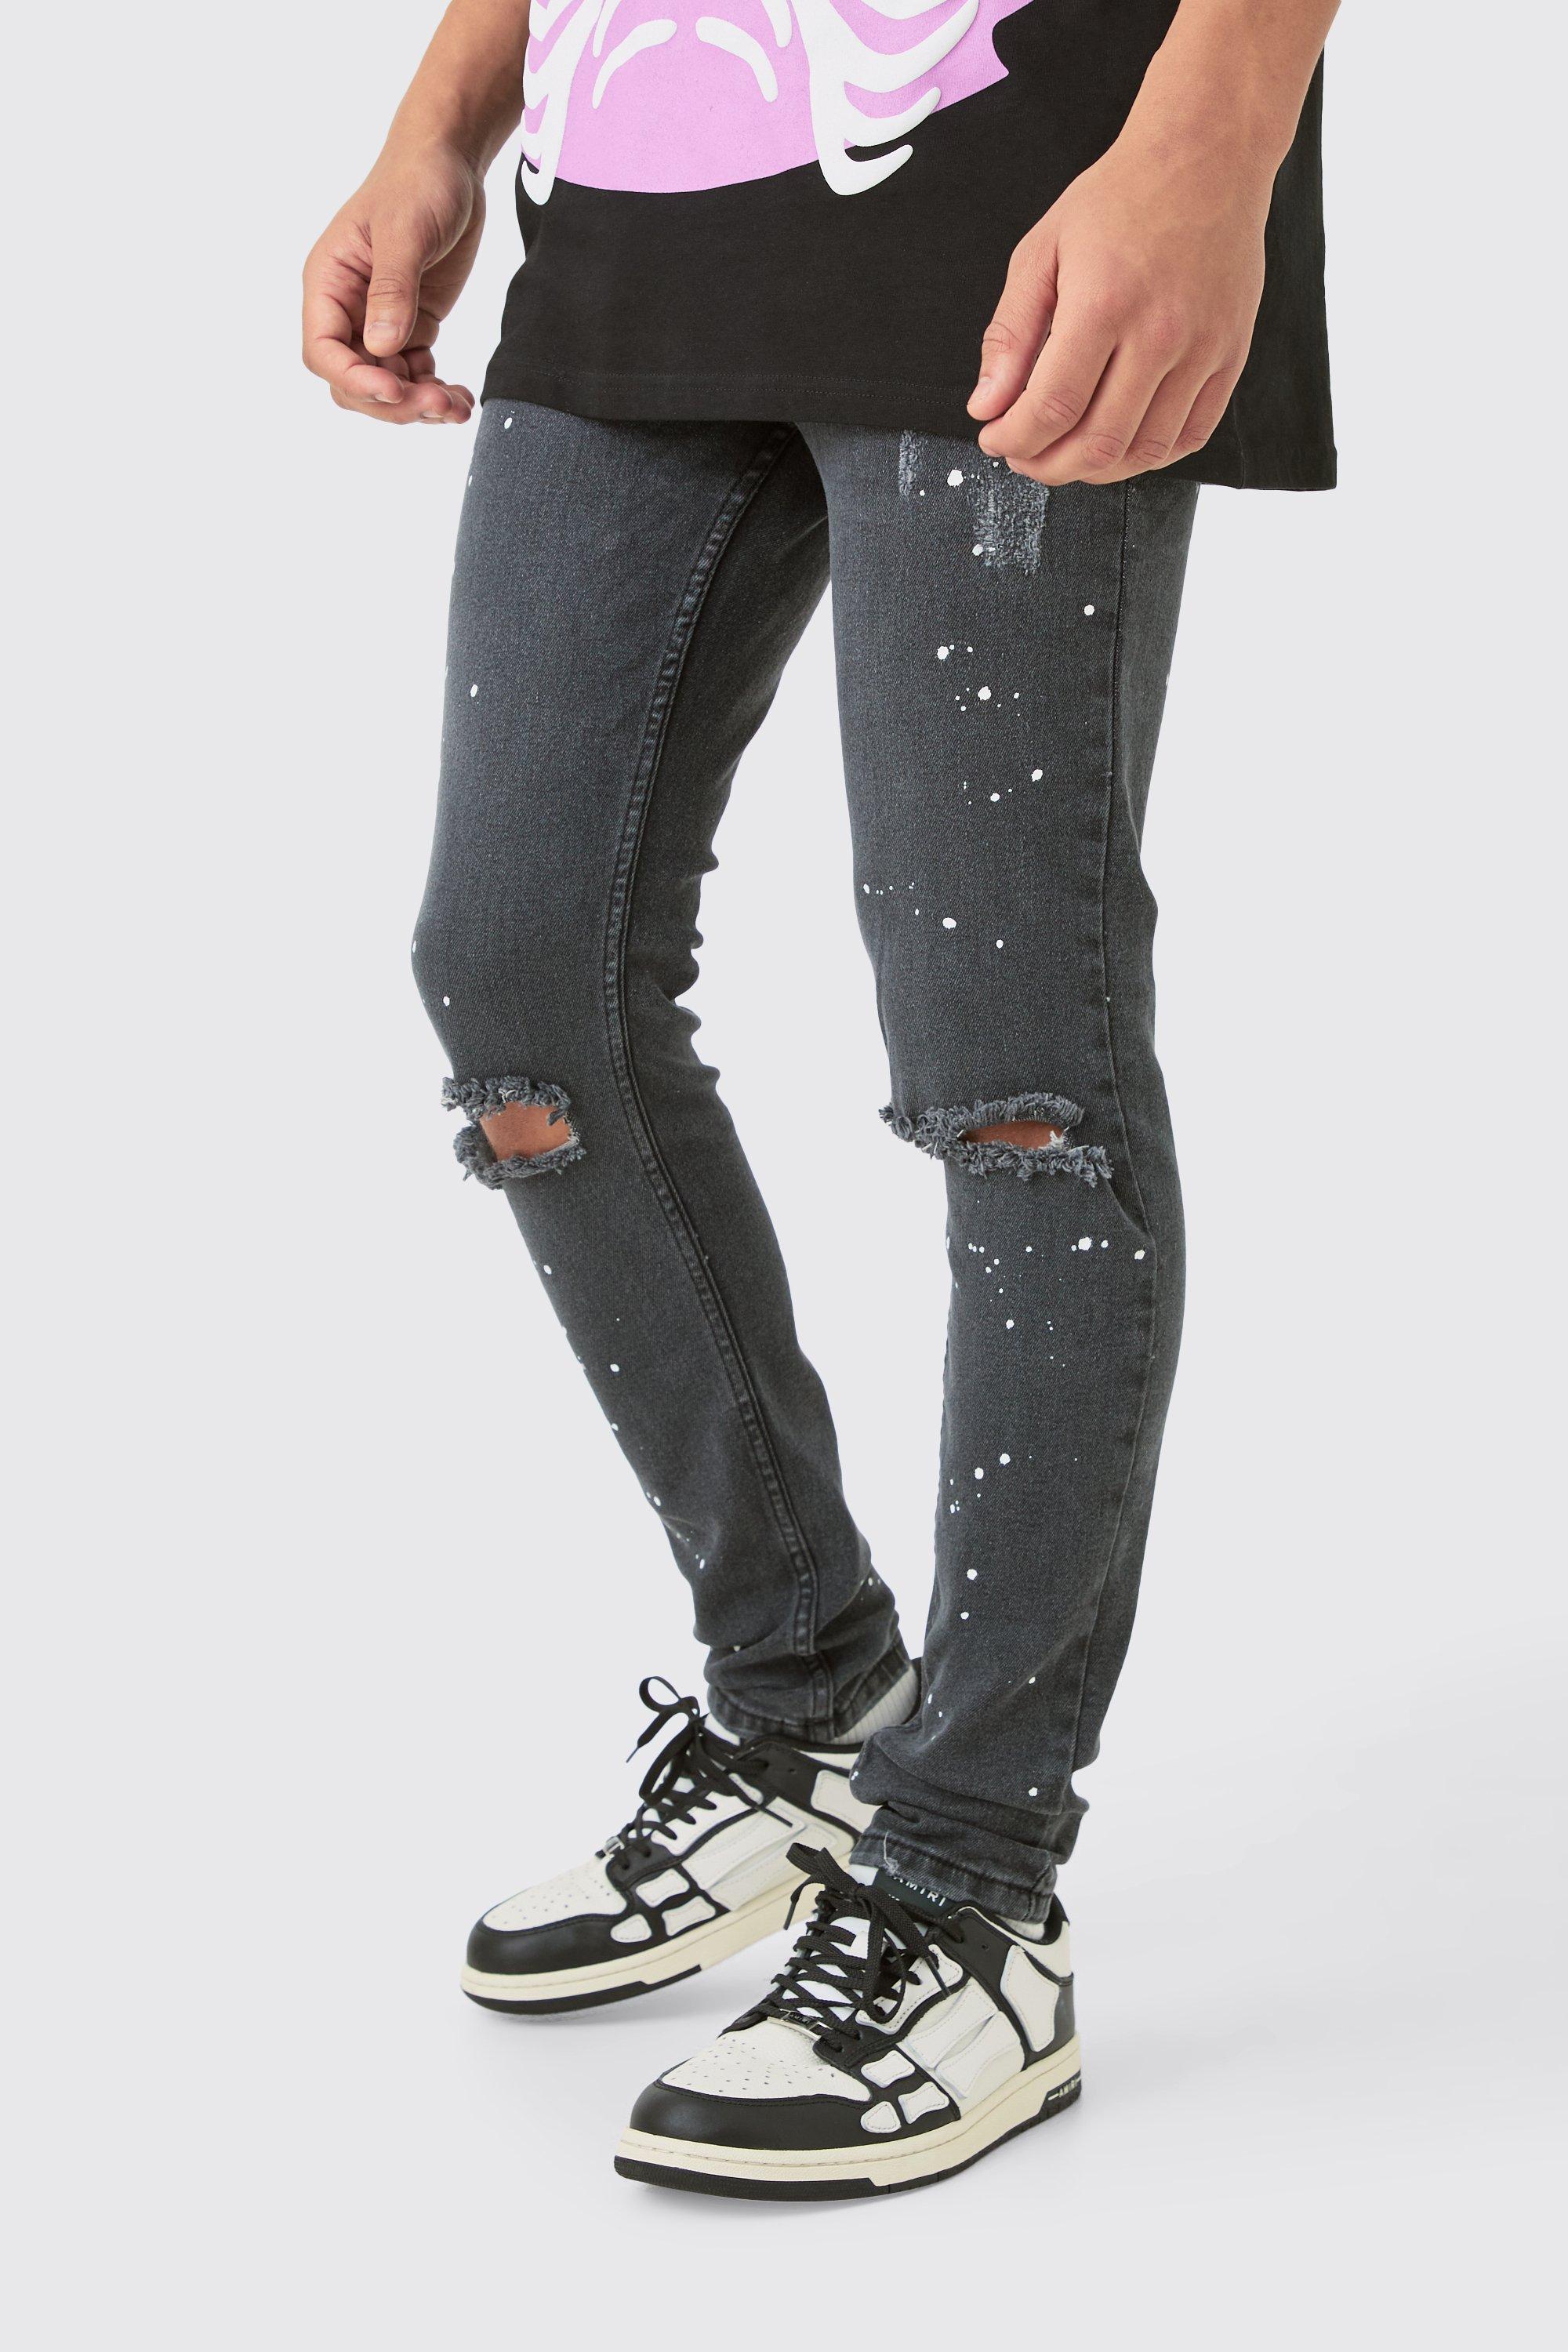 Image of Skinny Stretch Paint Splatter Ripped Jeans, Grigio